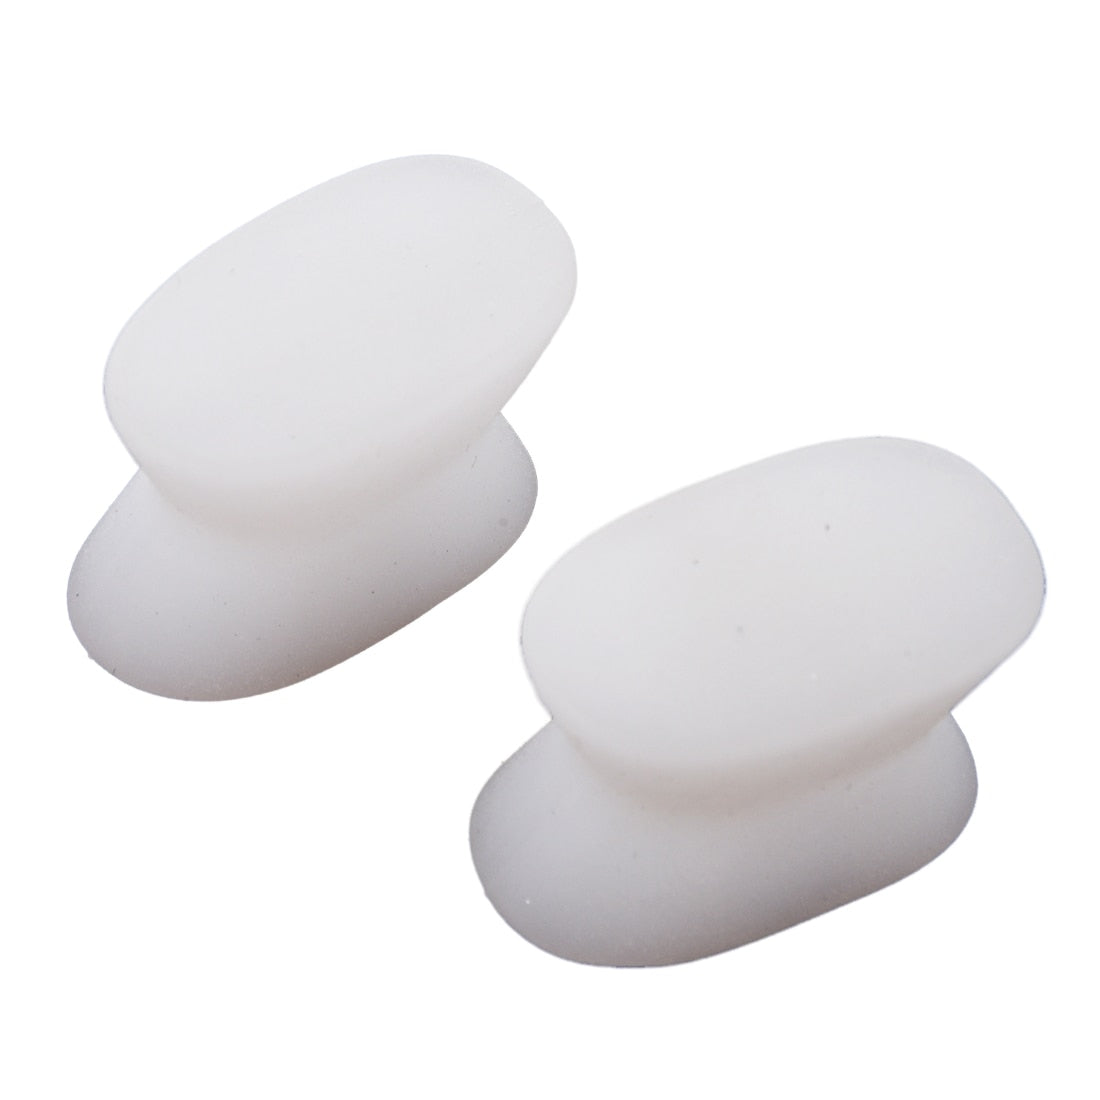 Hot 1 pair Silicone Gel Toe Spacers for Bunion Pain - ebowsos